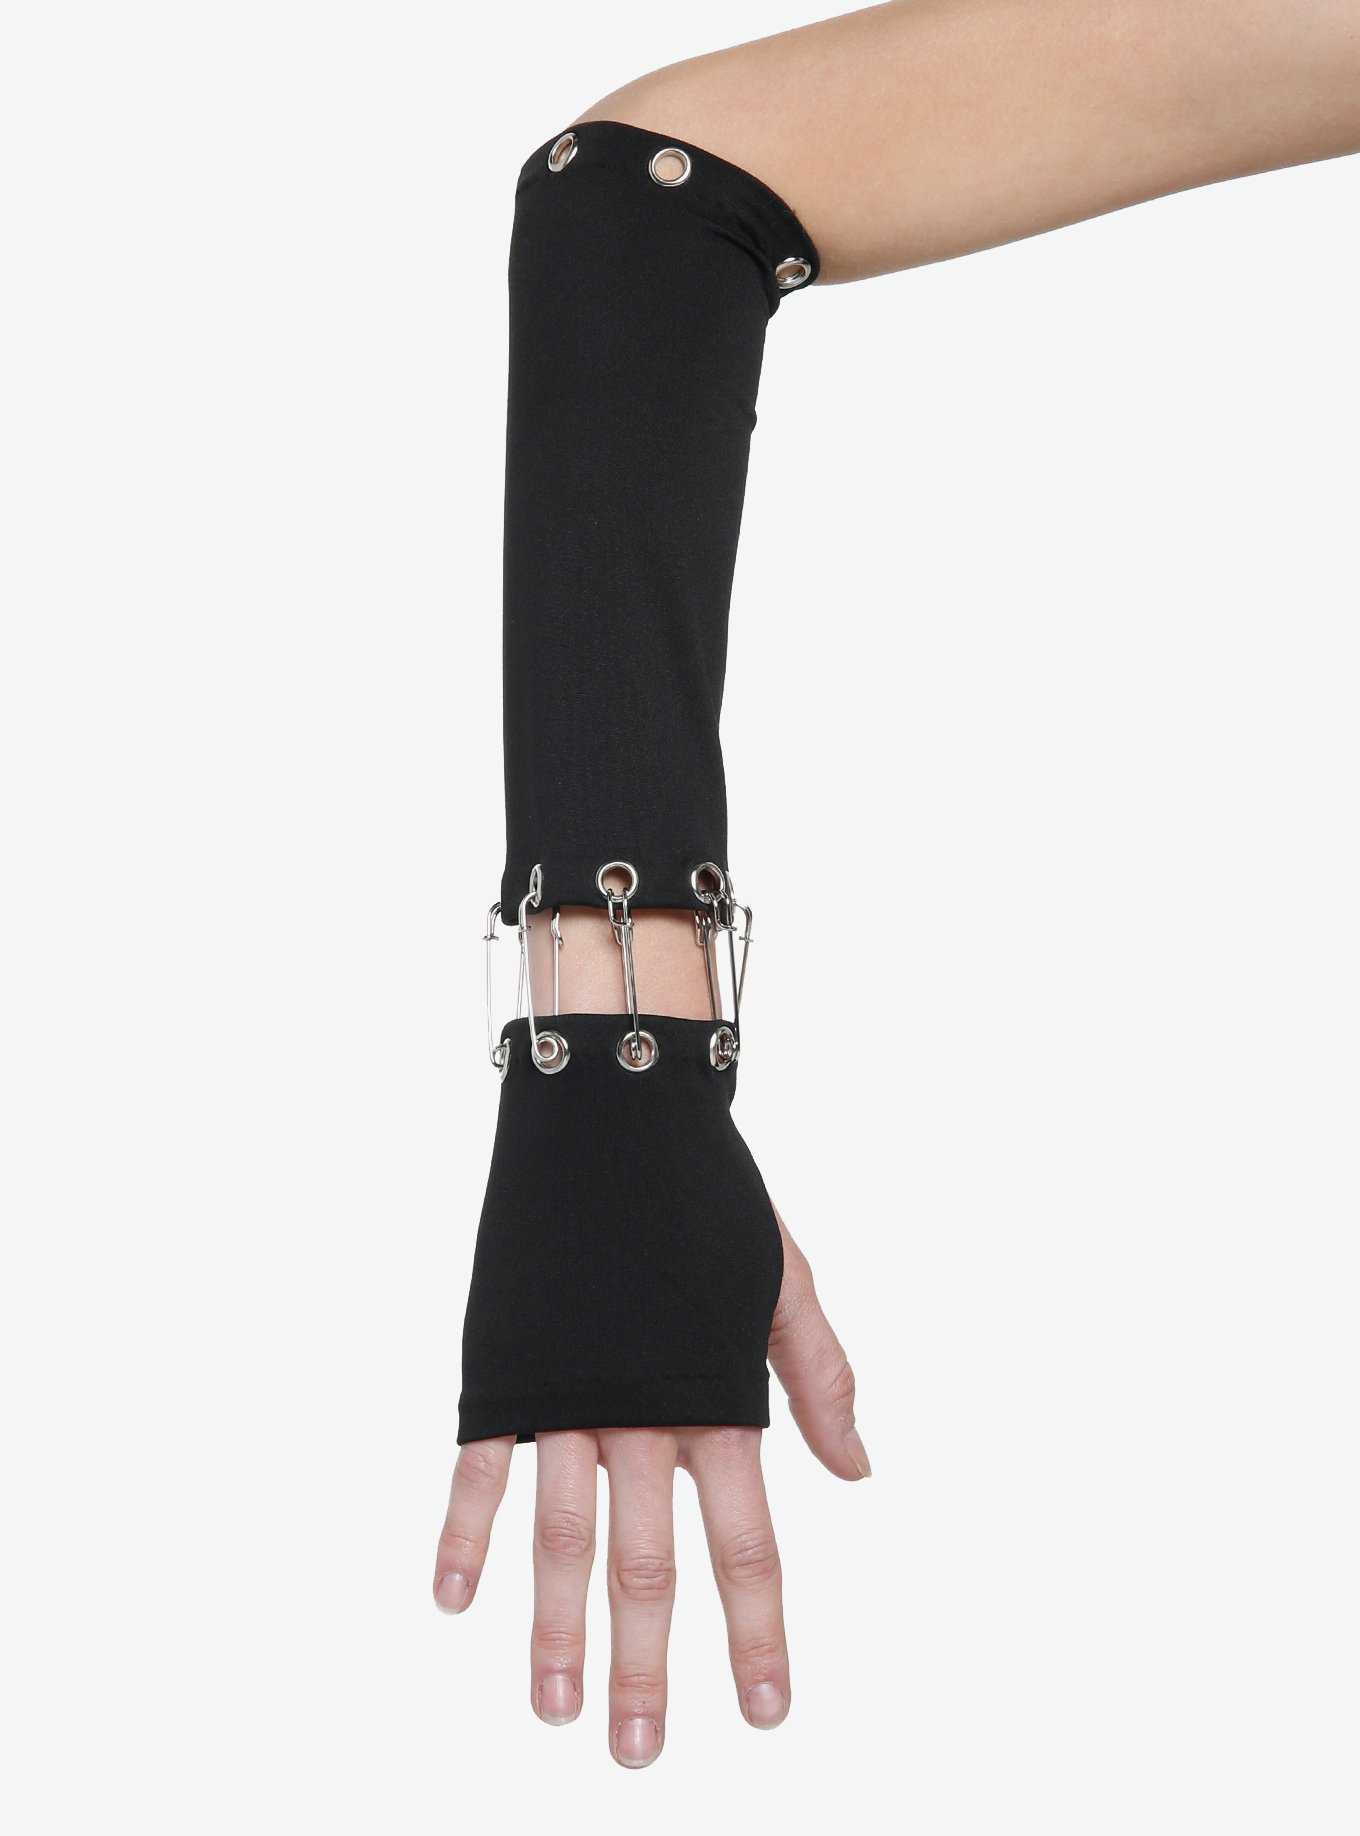 Grommet Safety Pin Cutout Arm Warmers, , hi-res